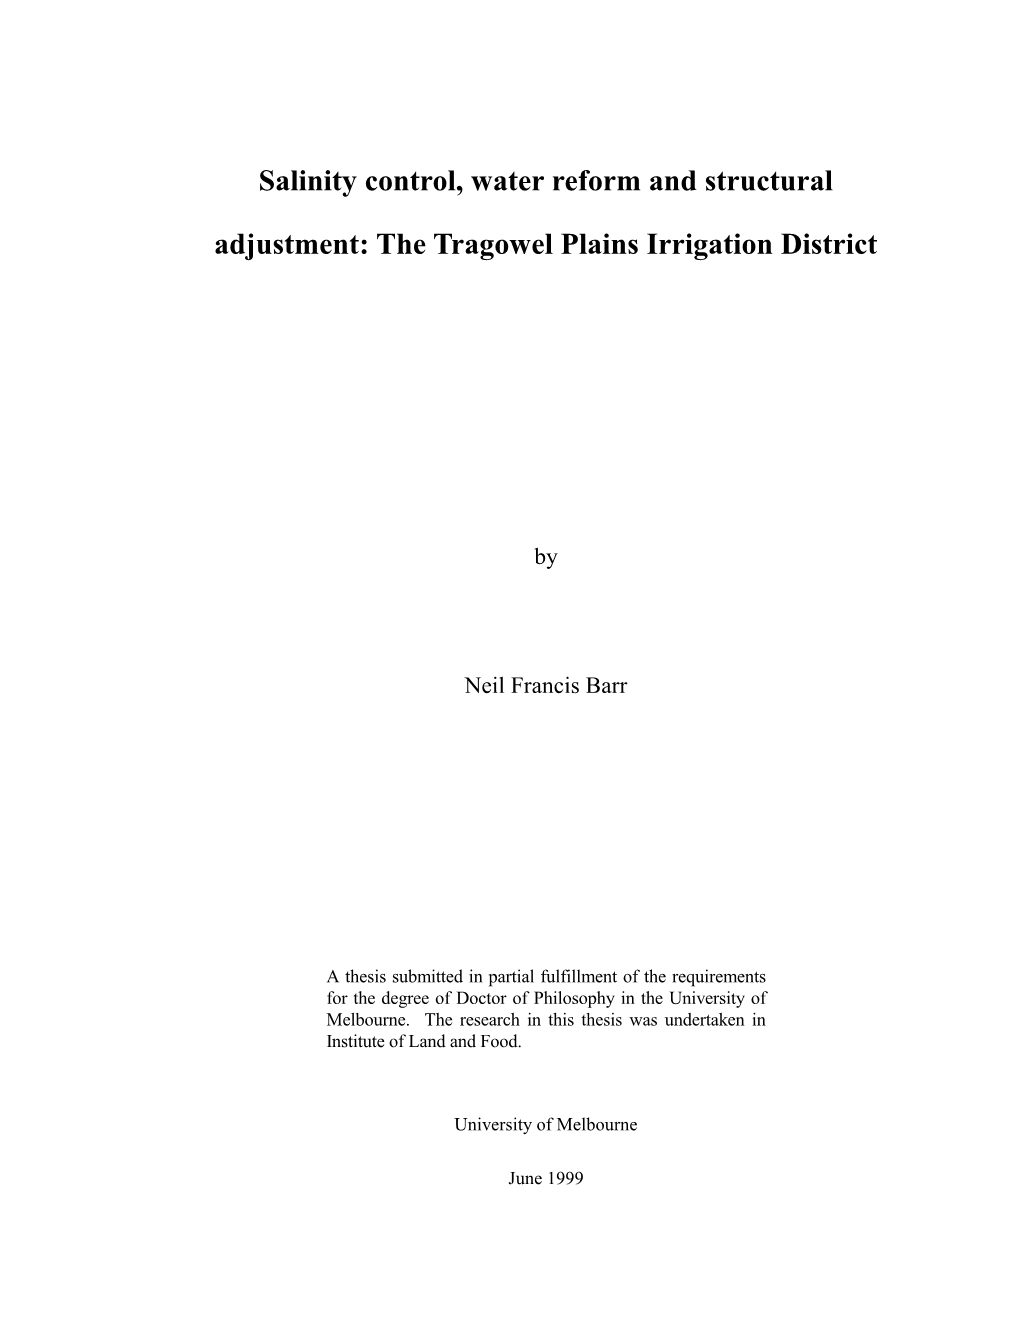 Salinity Control, Water Reform and Structural Adjustment: the Tragowel Plains Irrigation District